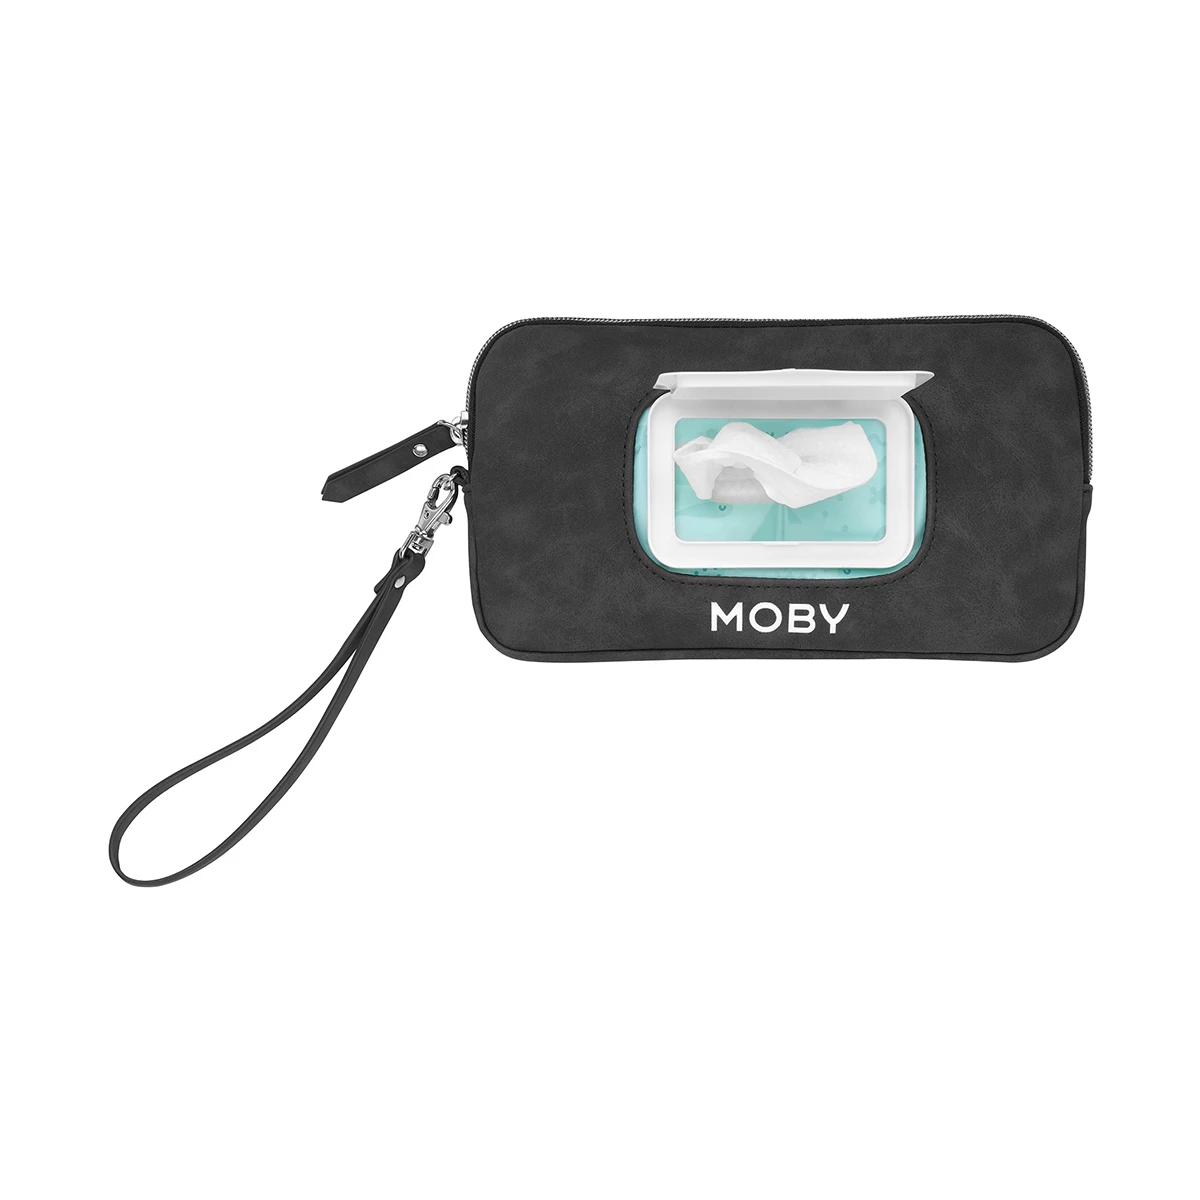 Wipes Case Wristlet - Charcoal